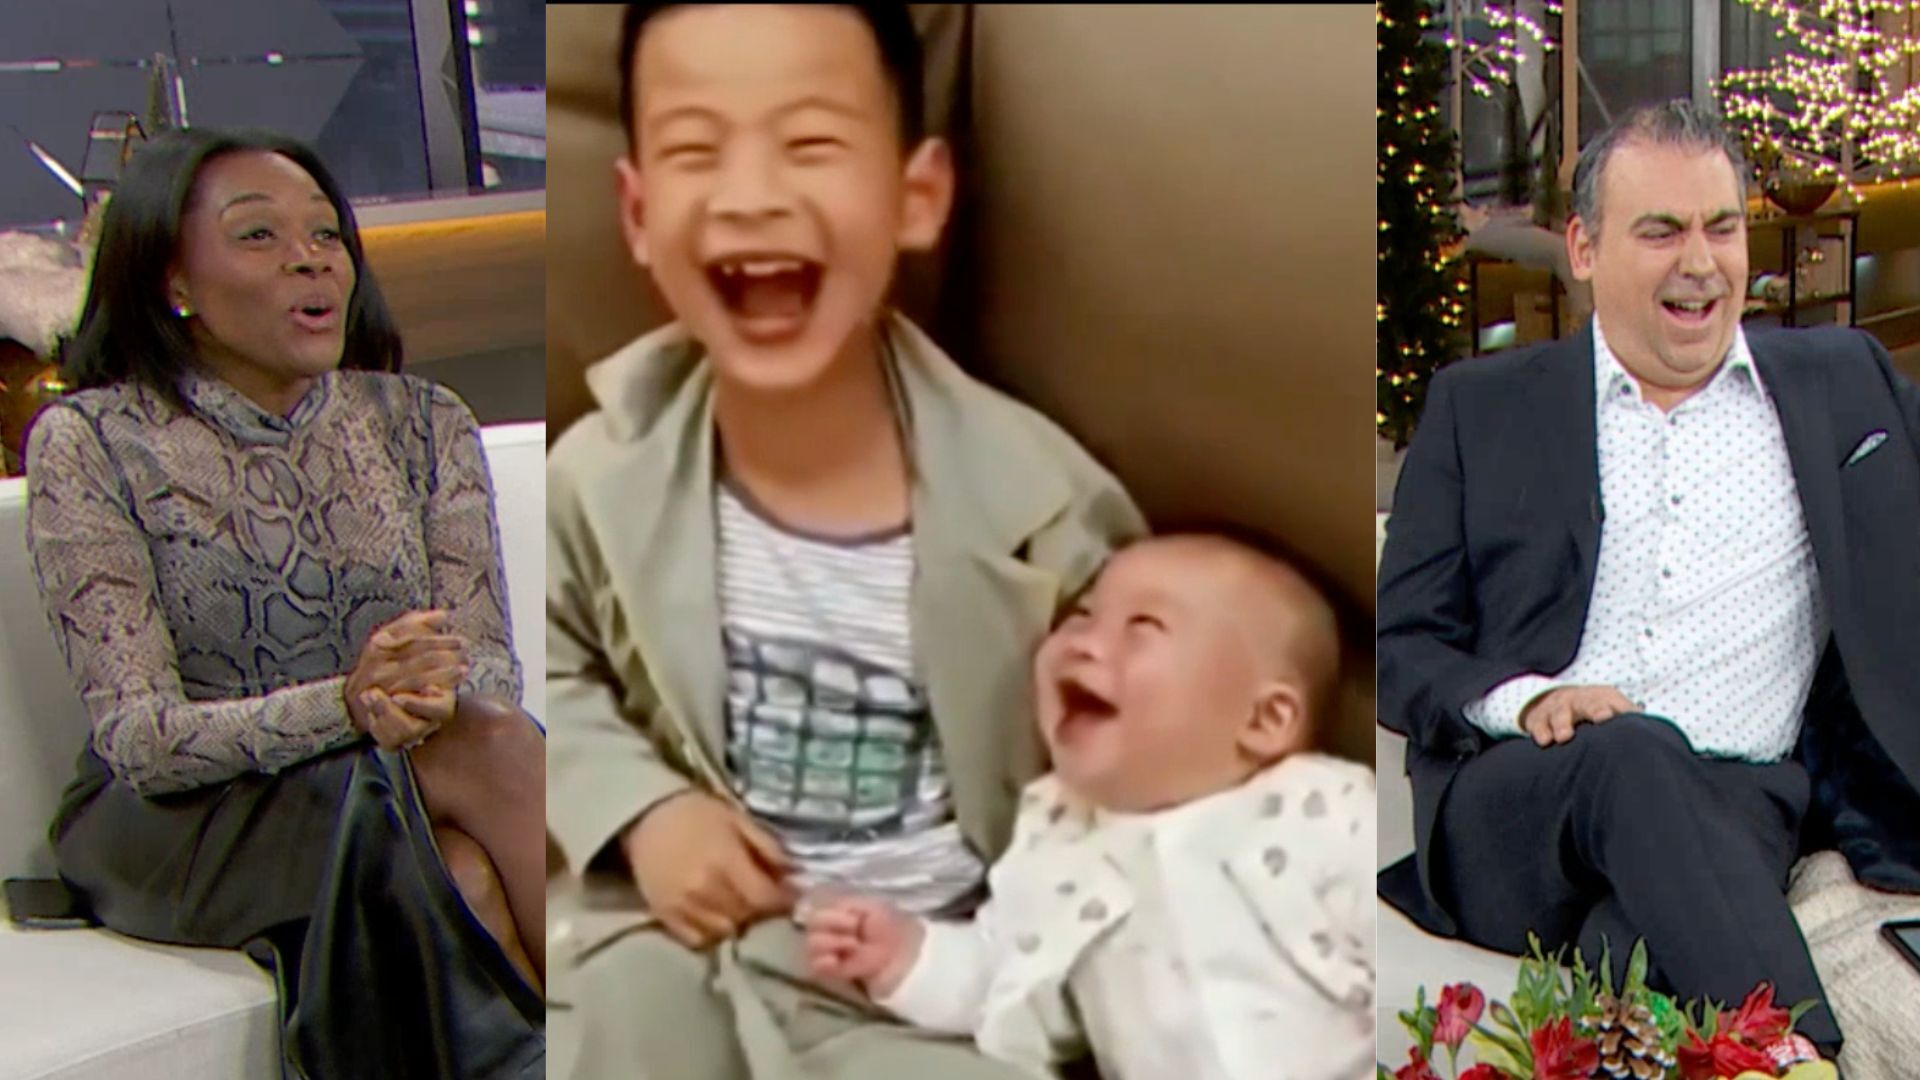 WATCH: These two siblings actually can't stop laughing